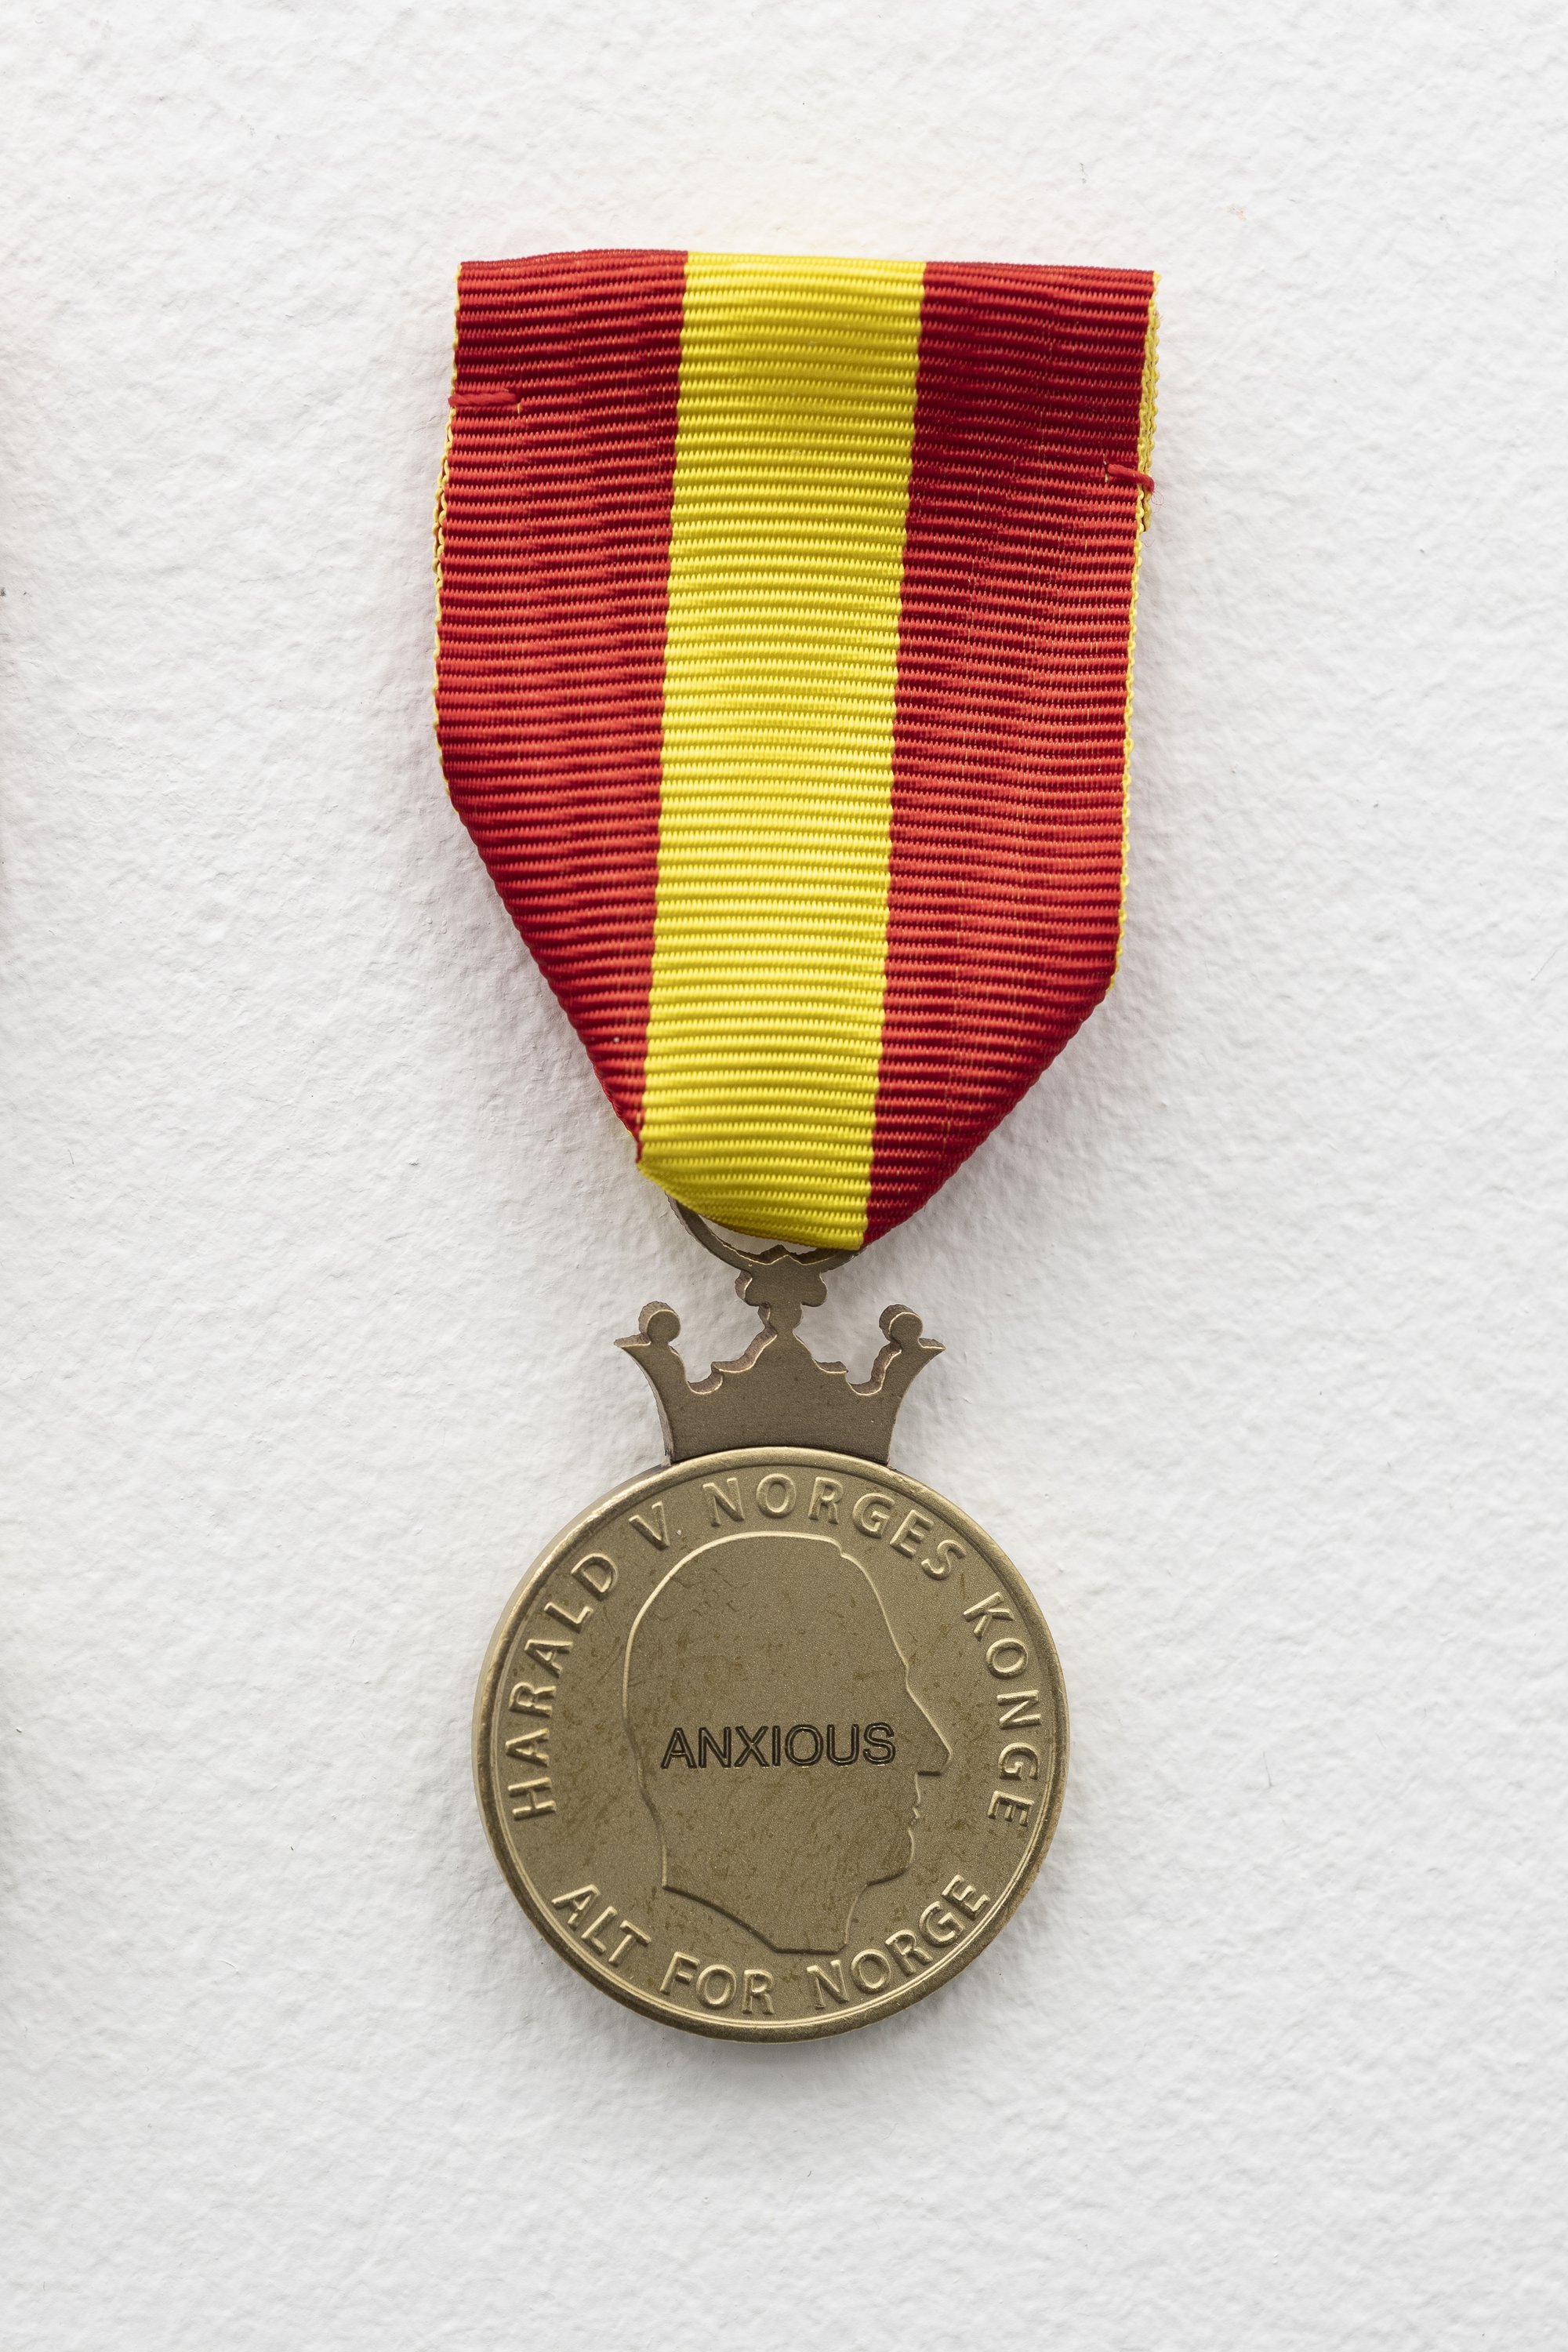 Sidsel Meineche Hansen, Anxious, medal of merit, stamped in Nordic Gold with engraving and silk ribbon, 30 mm (diameter) - 35 mm (ribbon), 2021